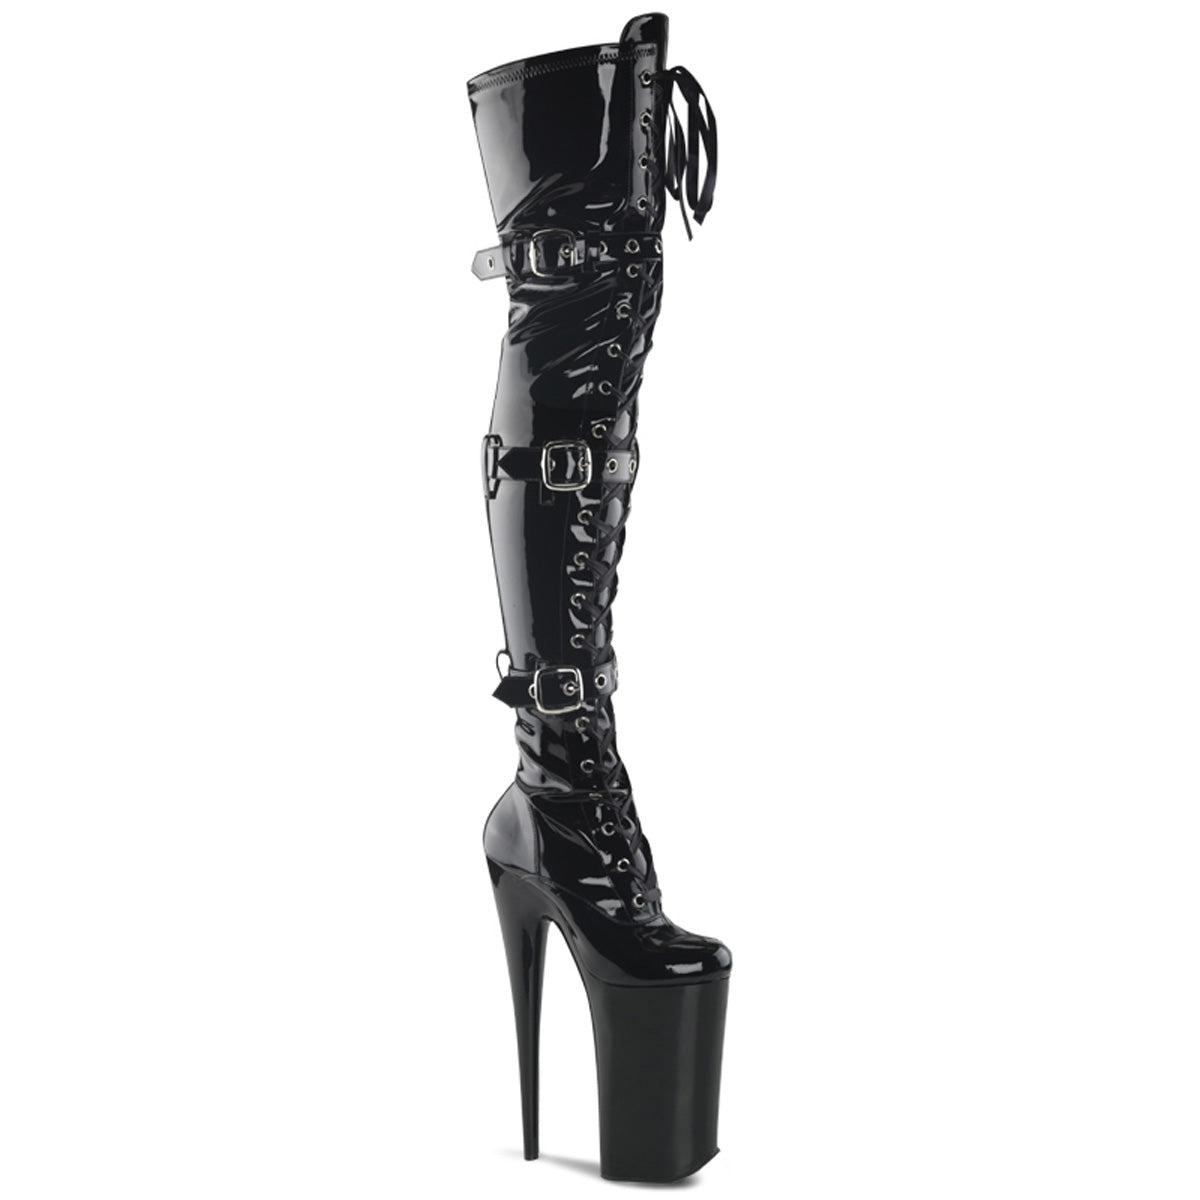 BEYOND-3028 Sexy 10" Heel Black Patent Strippers Thigh High Boots